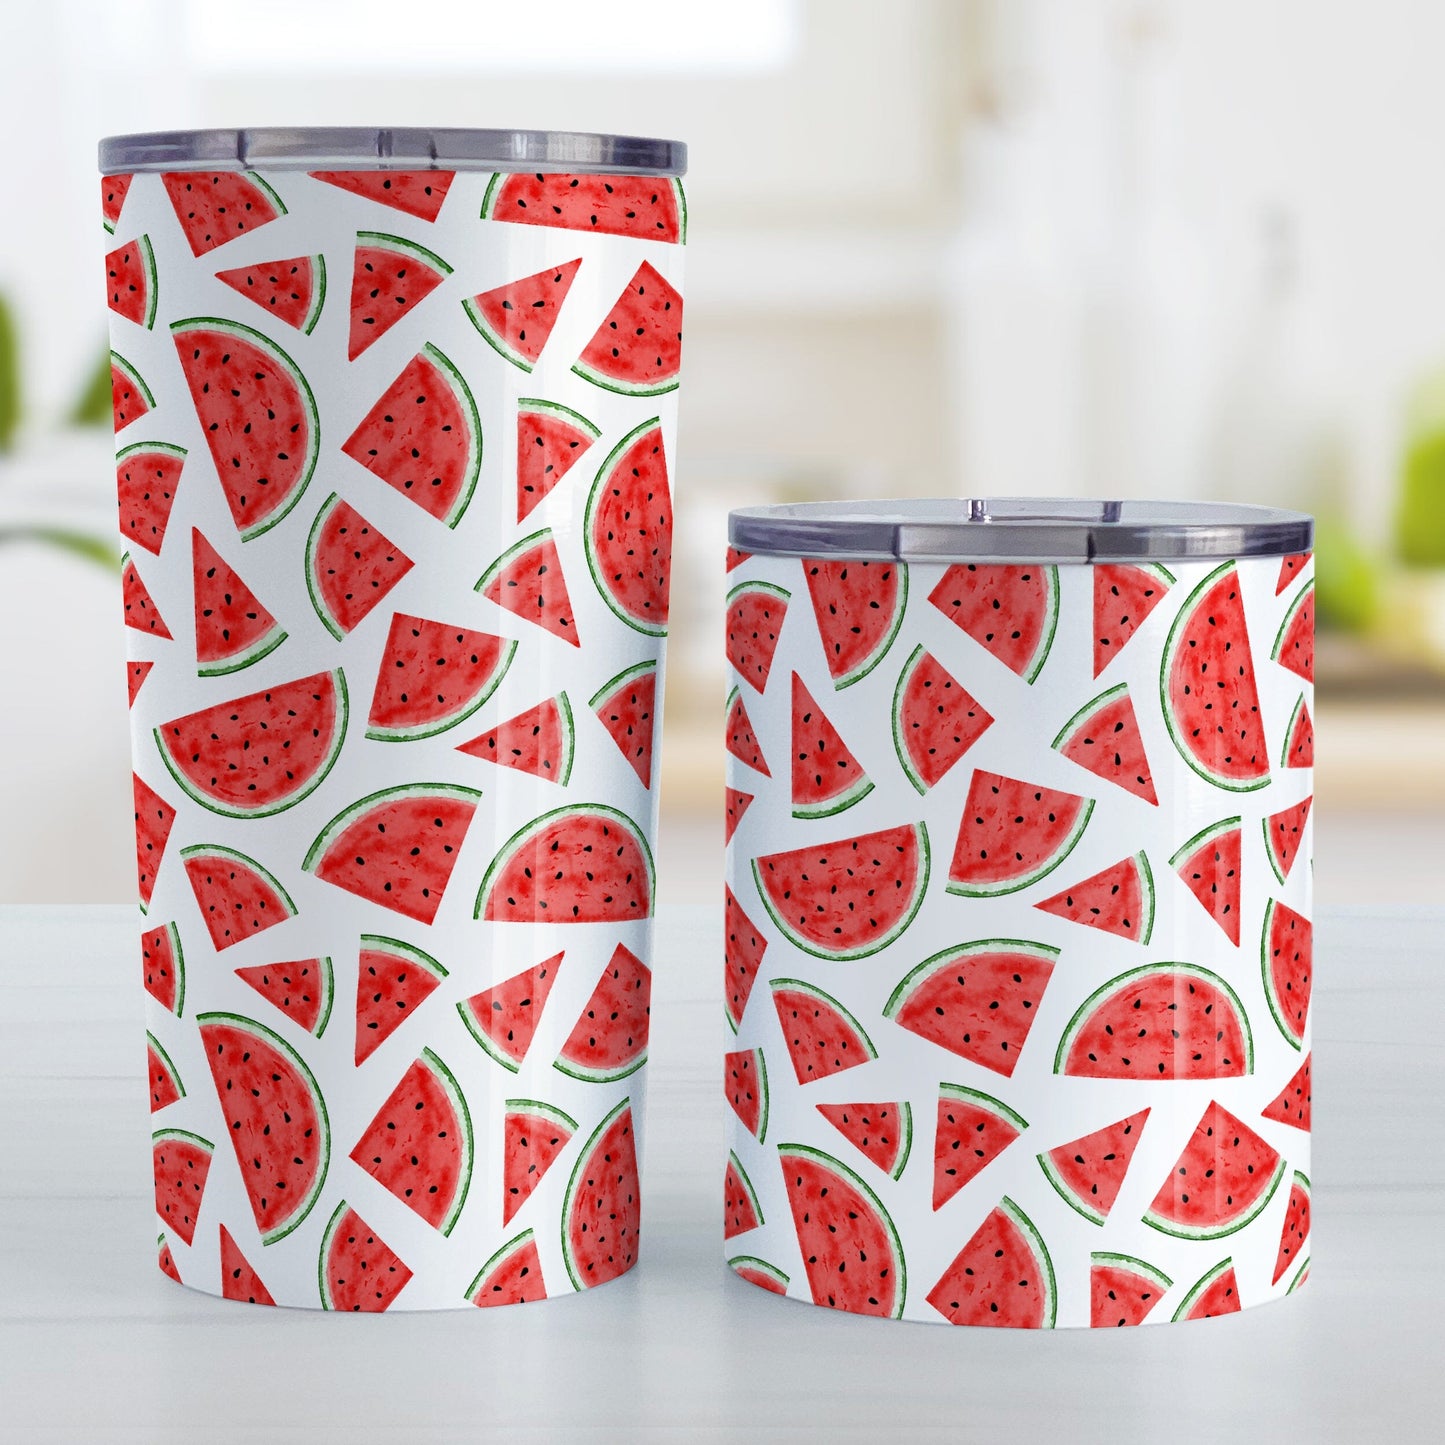 Watermelon Slices Tumbler Cups (20oz or 10oz) at Amy's Coffee Mugs. Stainless steel tumbler cups with sipping lids designed with a pattern of illustrated watermelon slices that wraps around the cups. Photo shows both sized cups next to each other.